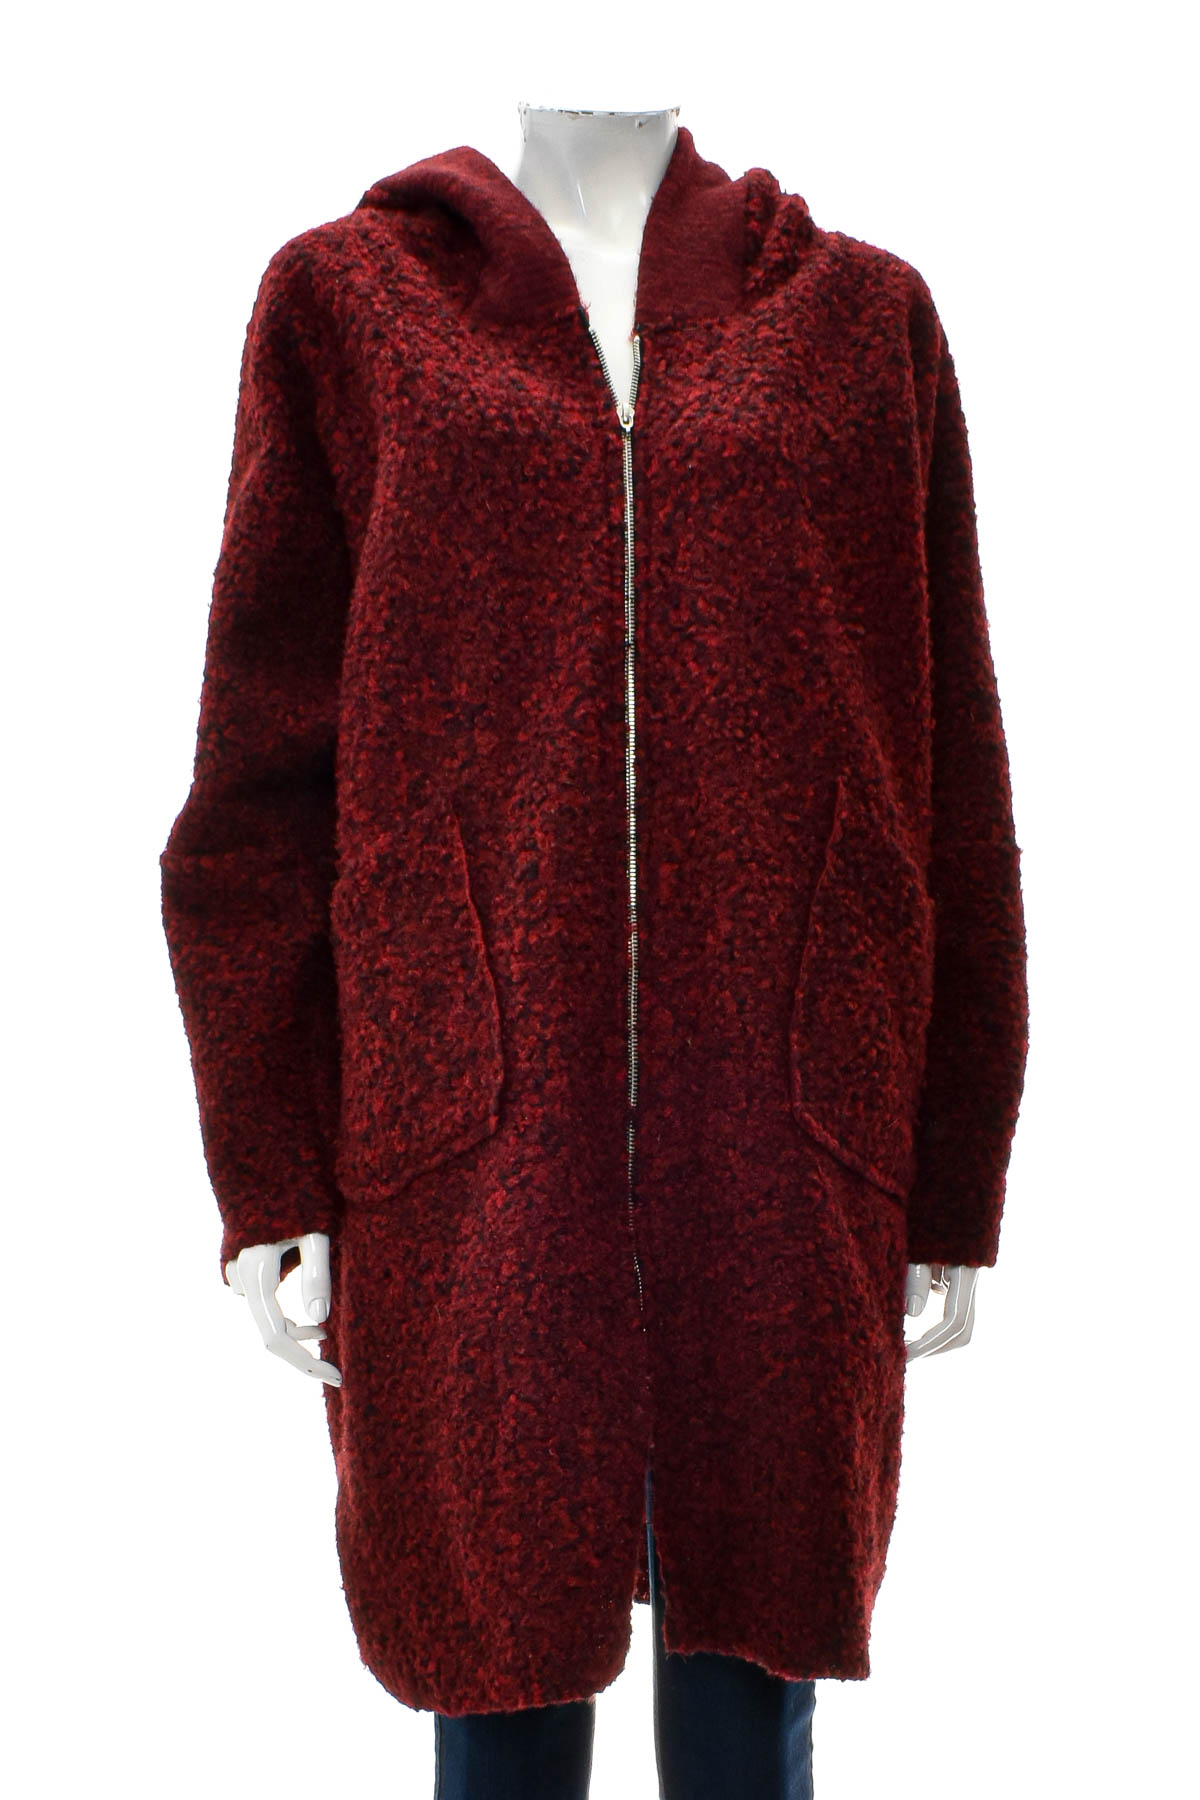 Women's coat - RM Collection - 0